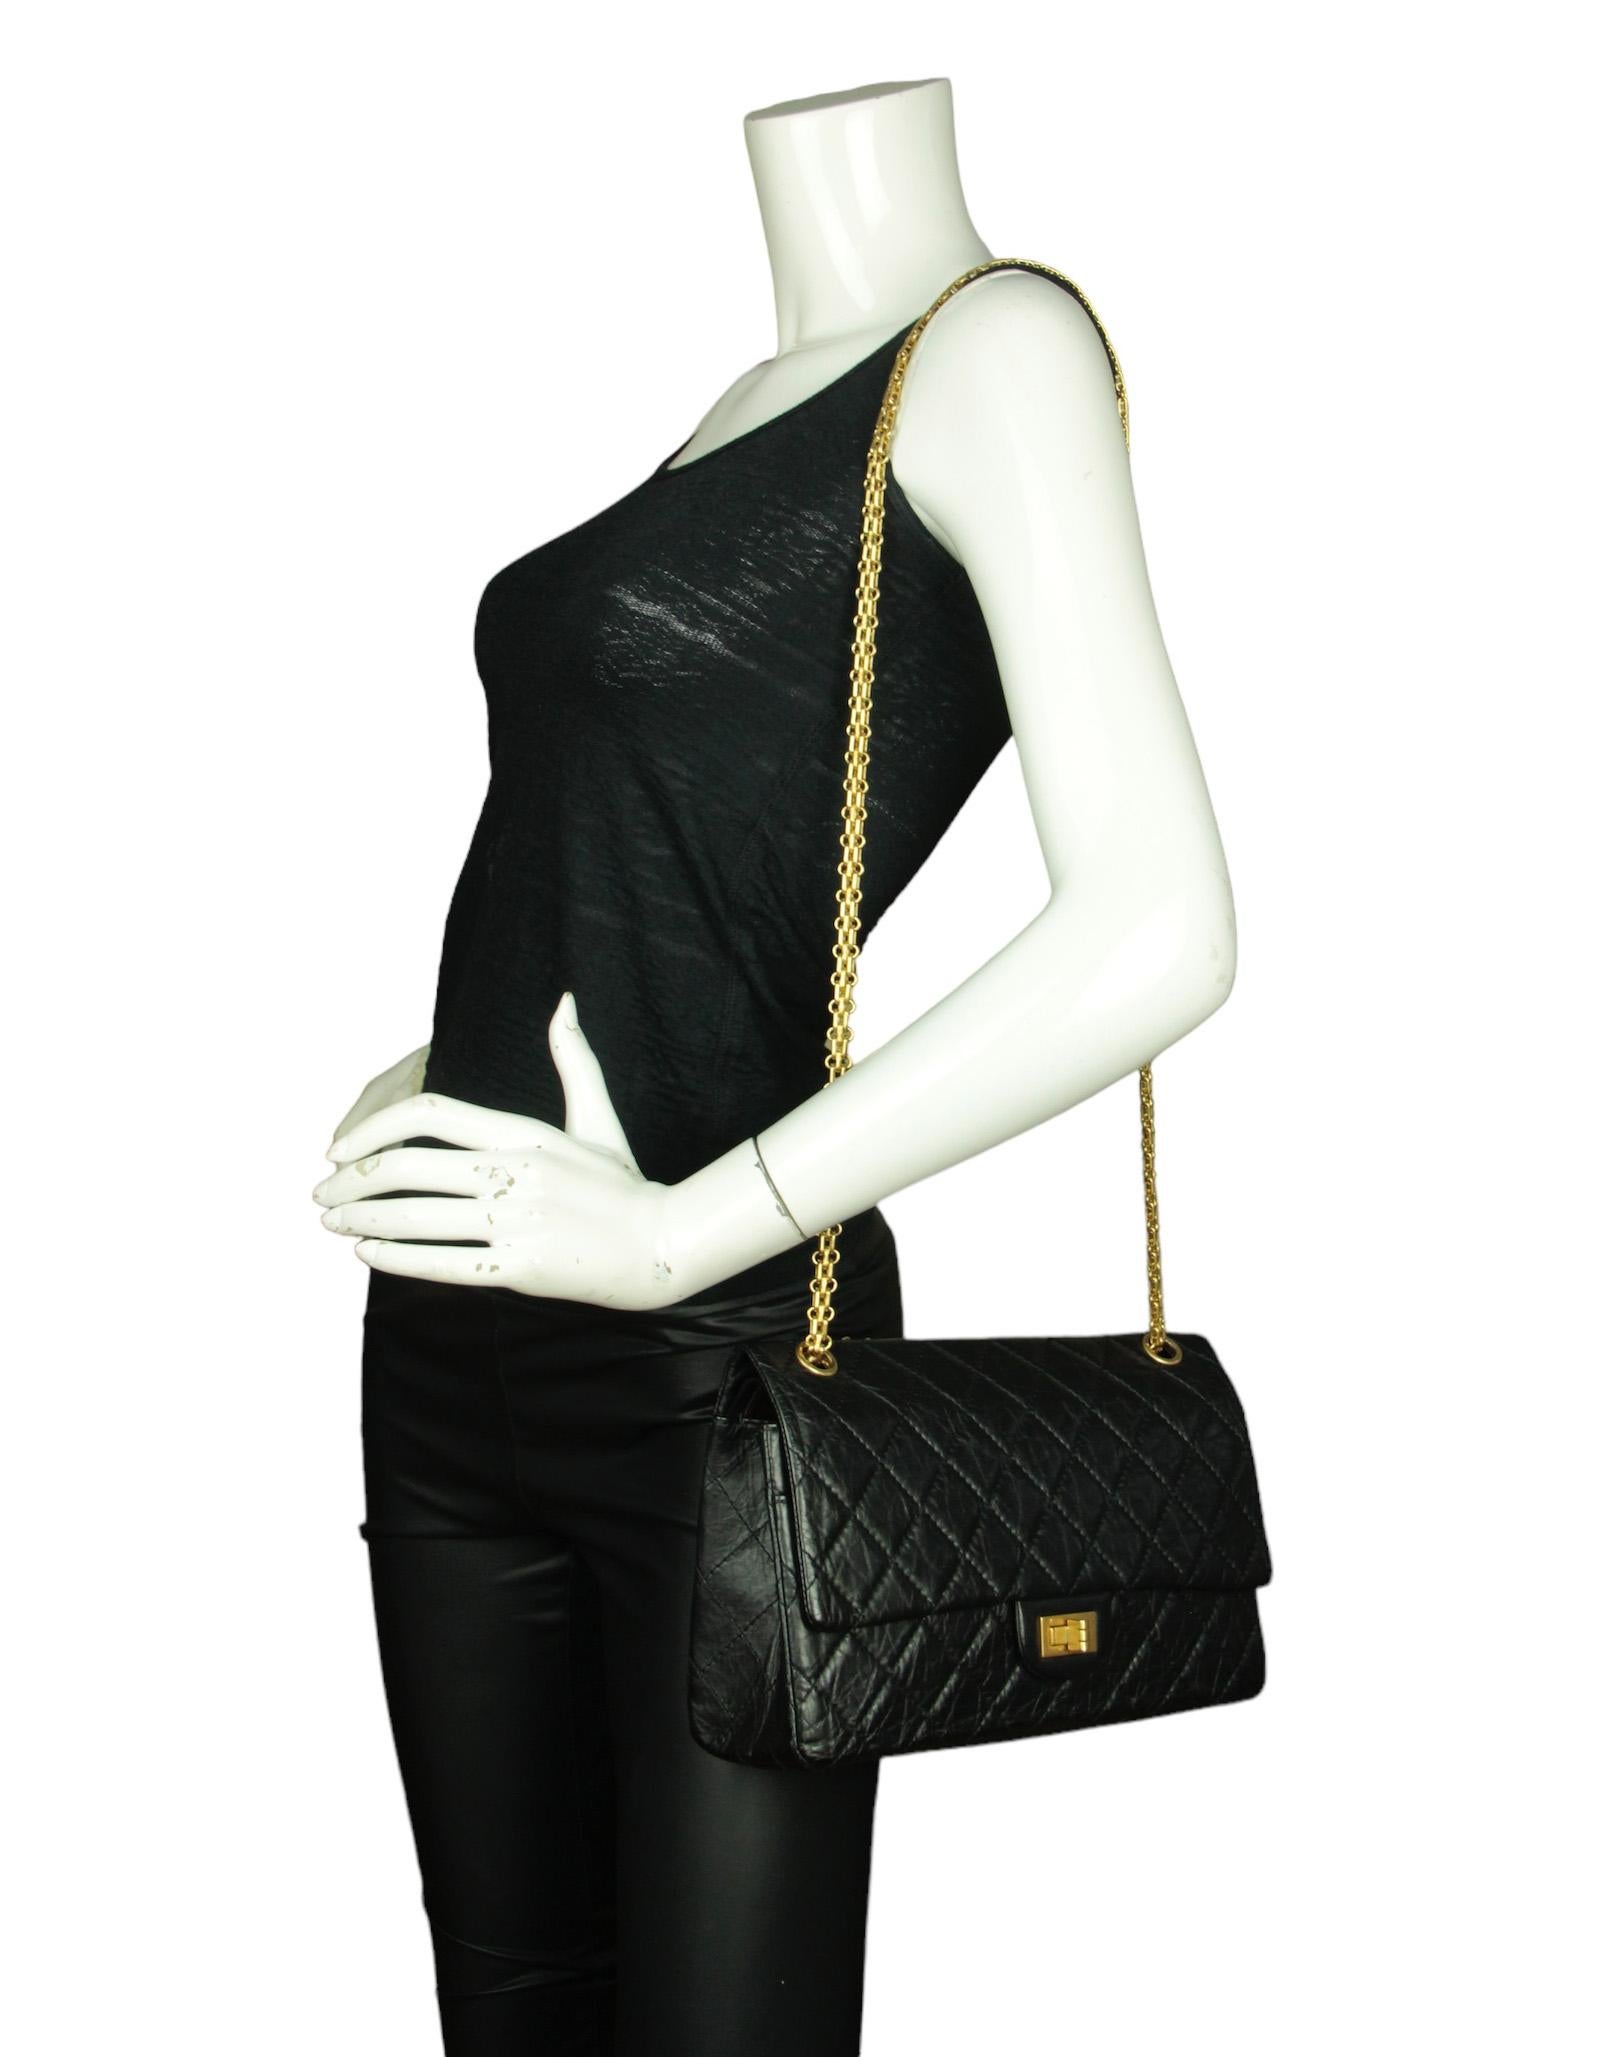 Chanel Black Calfskin Leather Quilted 2.55 Reissue 226 Flap Bag In Excellent Condition For Sale In New York, NY